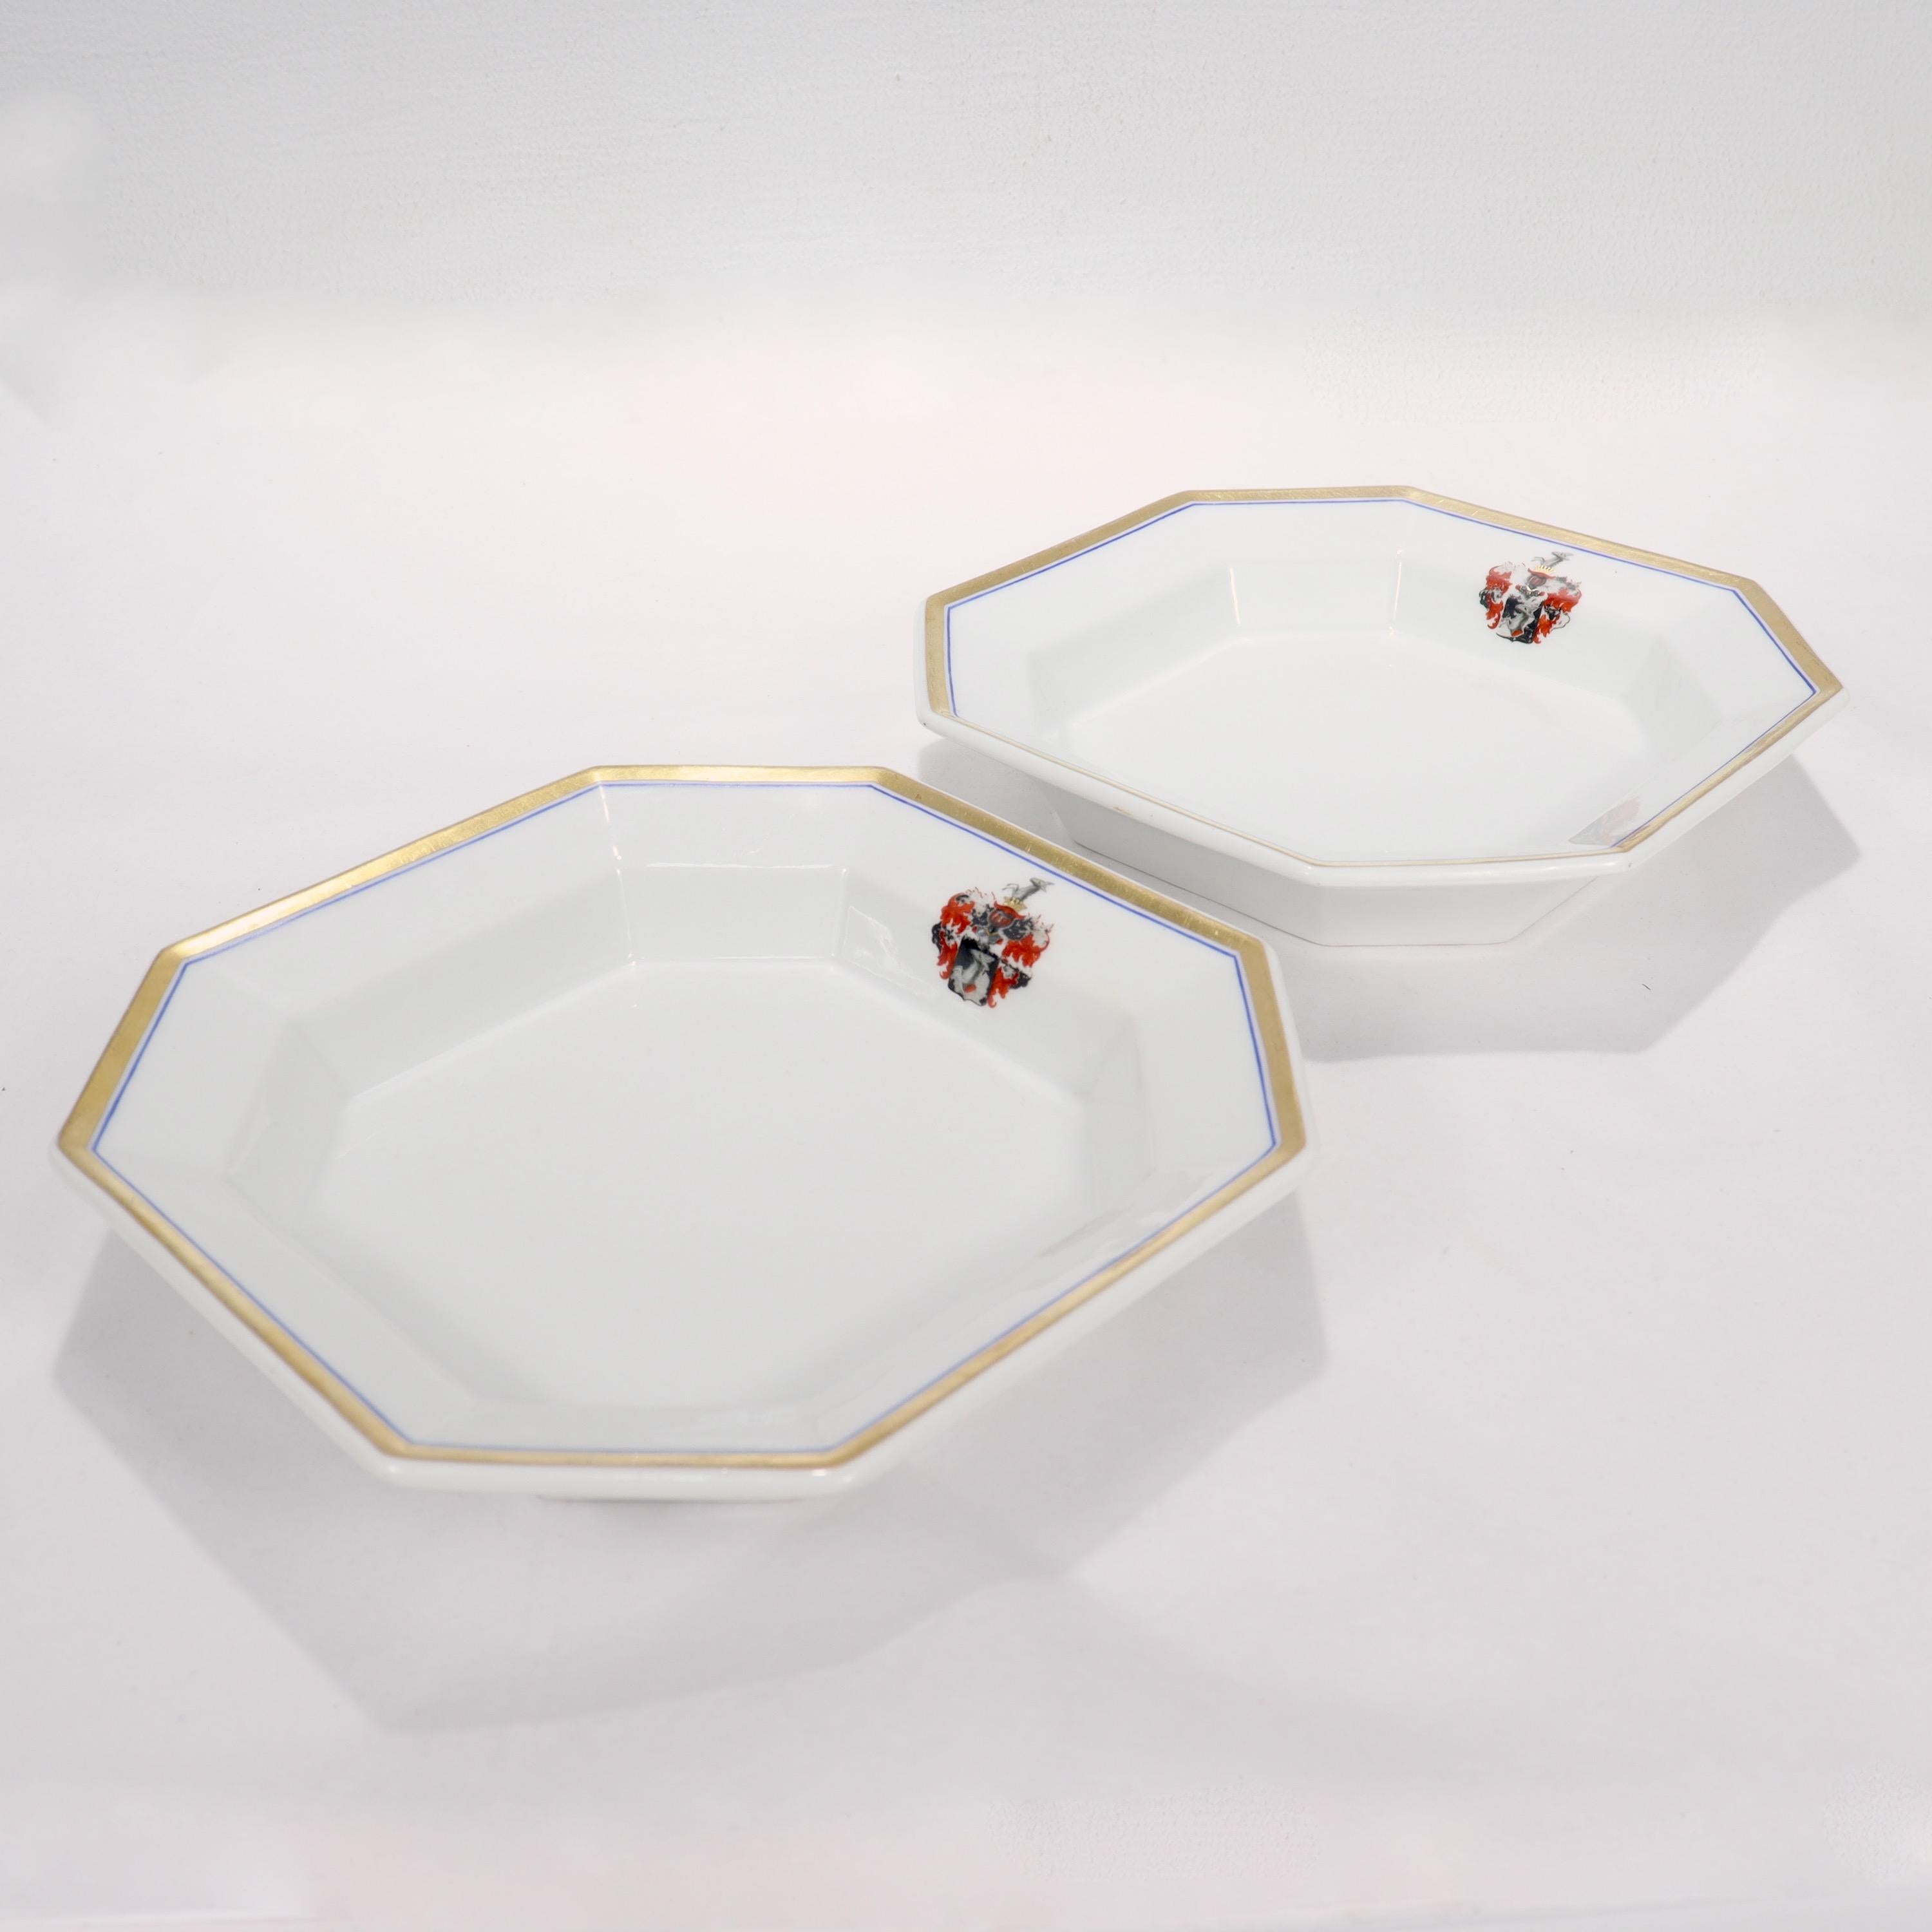 Pair of Antique KPM Royal Berlin Armorial Octagonal Porcelain Bowls or Plates In Good Condition For Sale In Philadelphia, PA